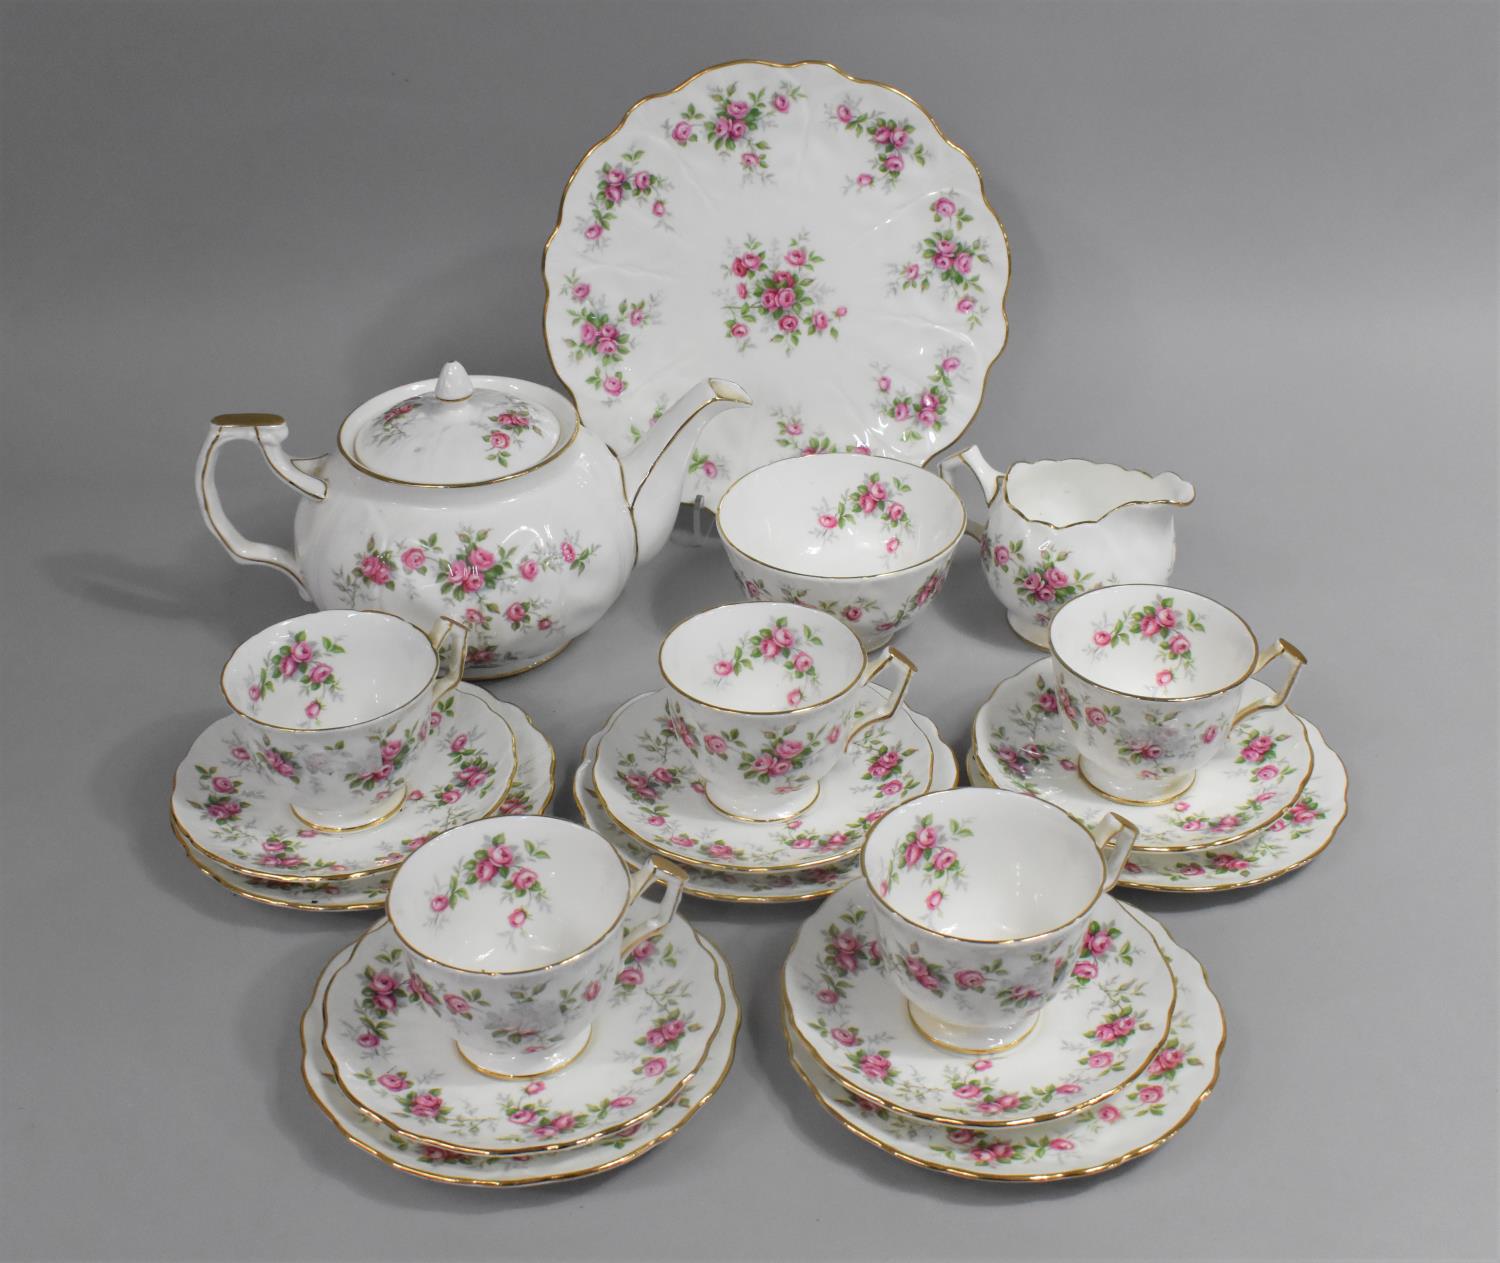 An Aynsley Grotto Rose Teaset to Comprise Five Cups, Teapot, Saucers, Side Plates and a Cakeplate